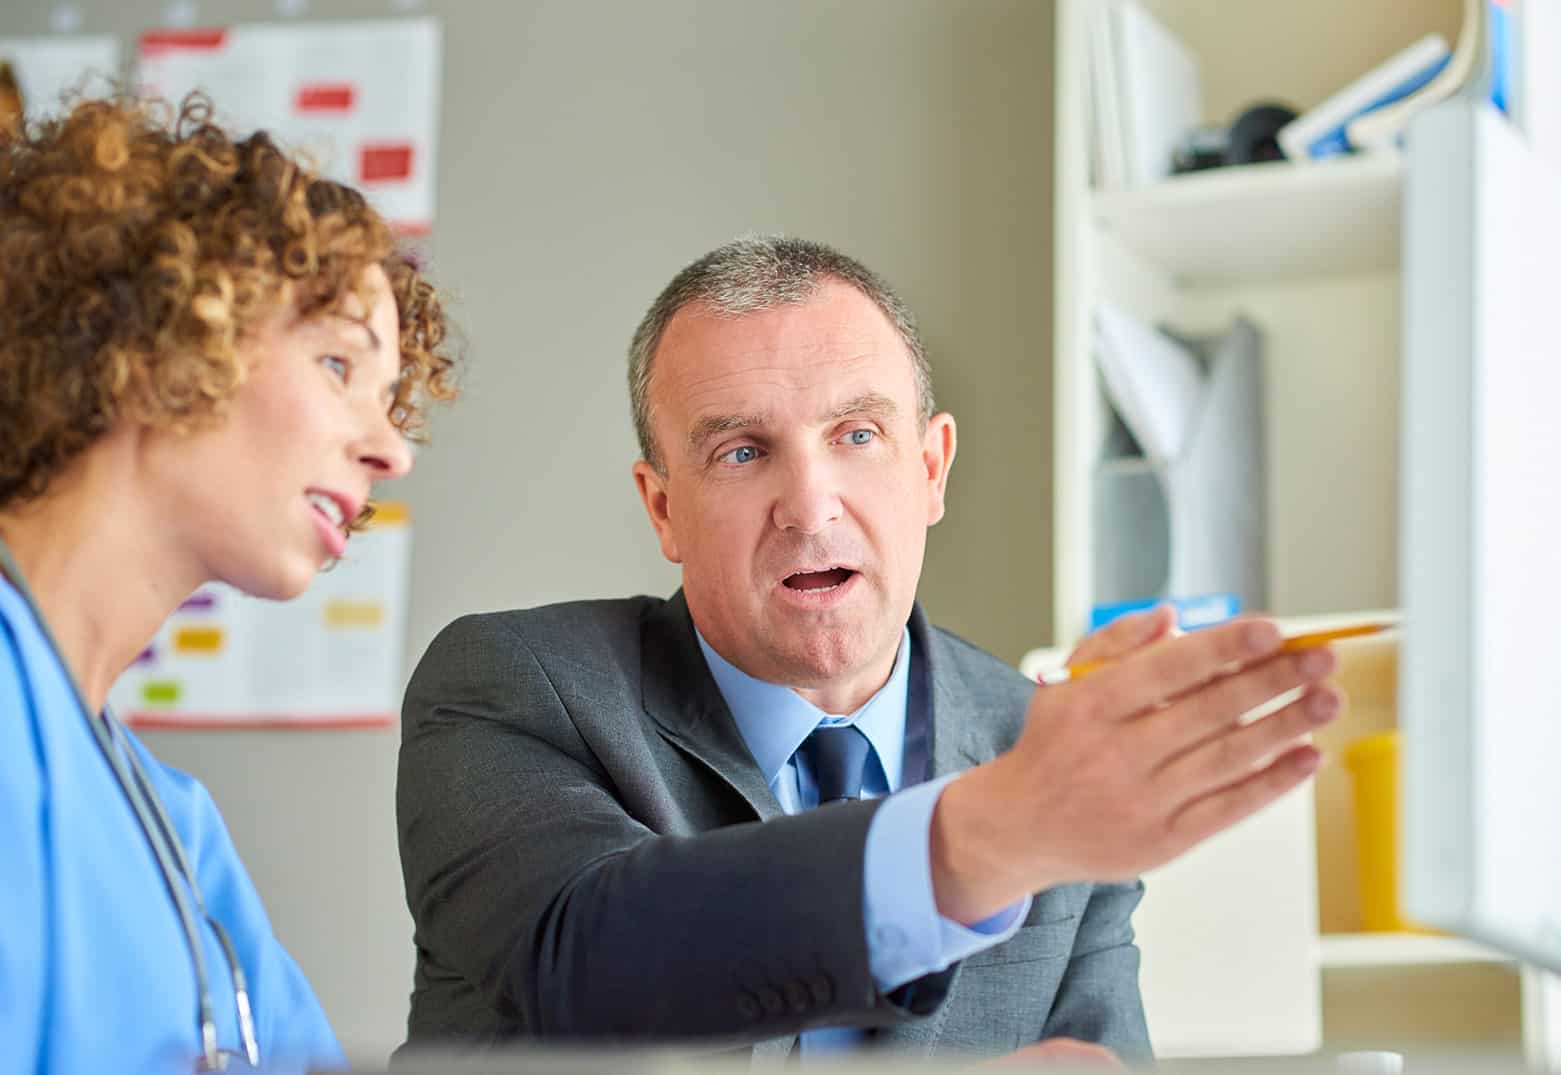 Business person explaining value based care requirements on a computer to a doctor.